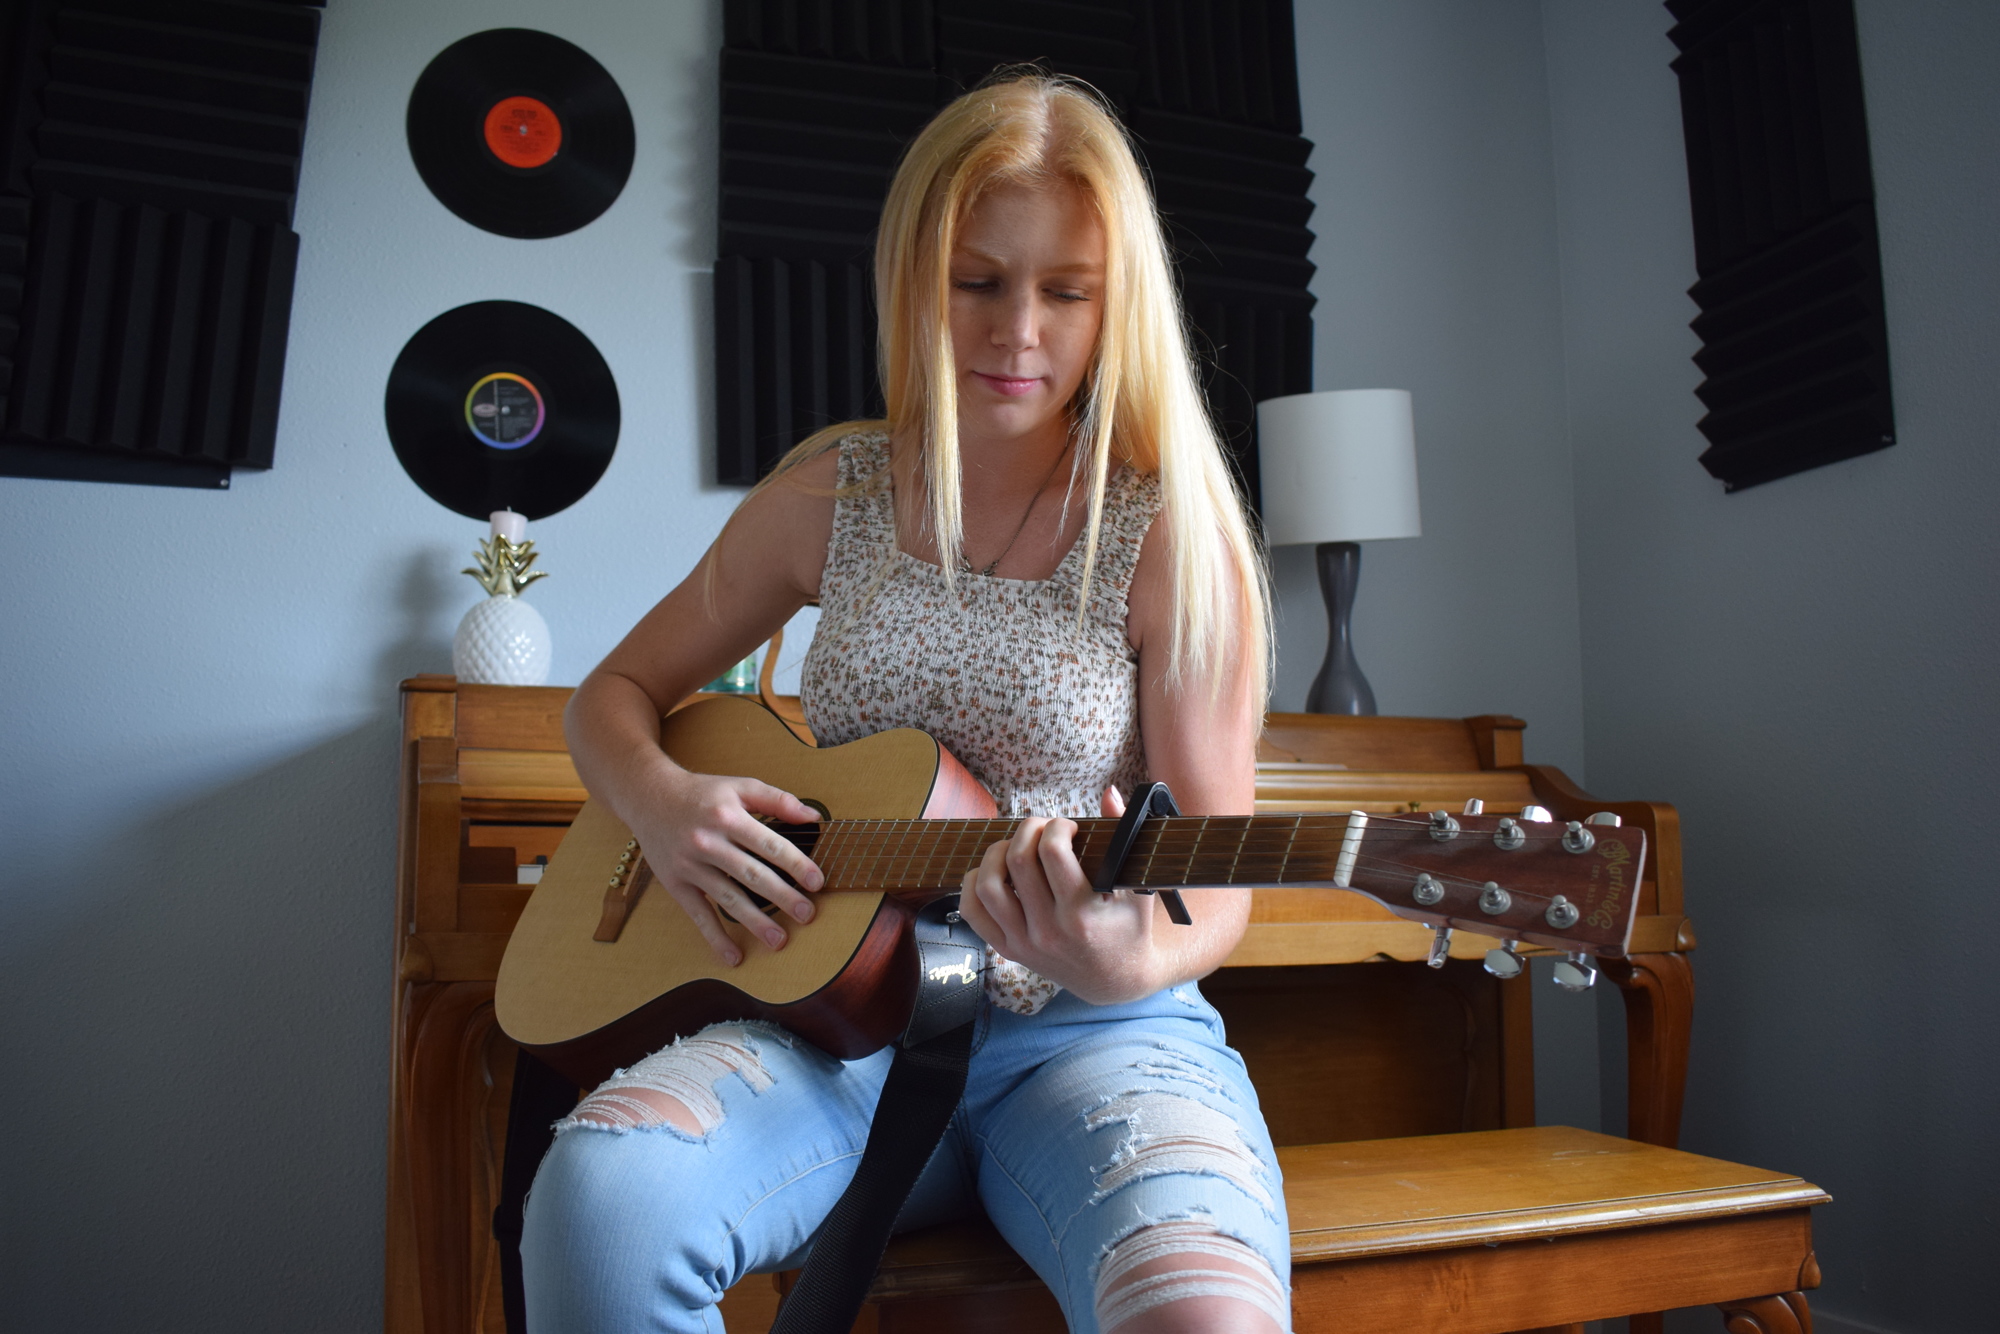 Kaitlyn Hornung says Music Compound has helped her learn more about songwriting style.